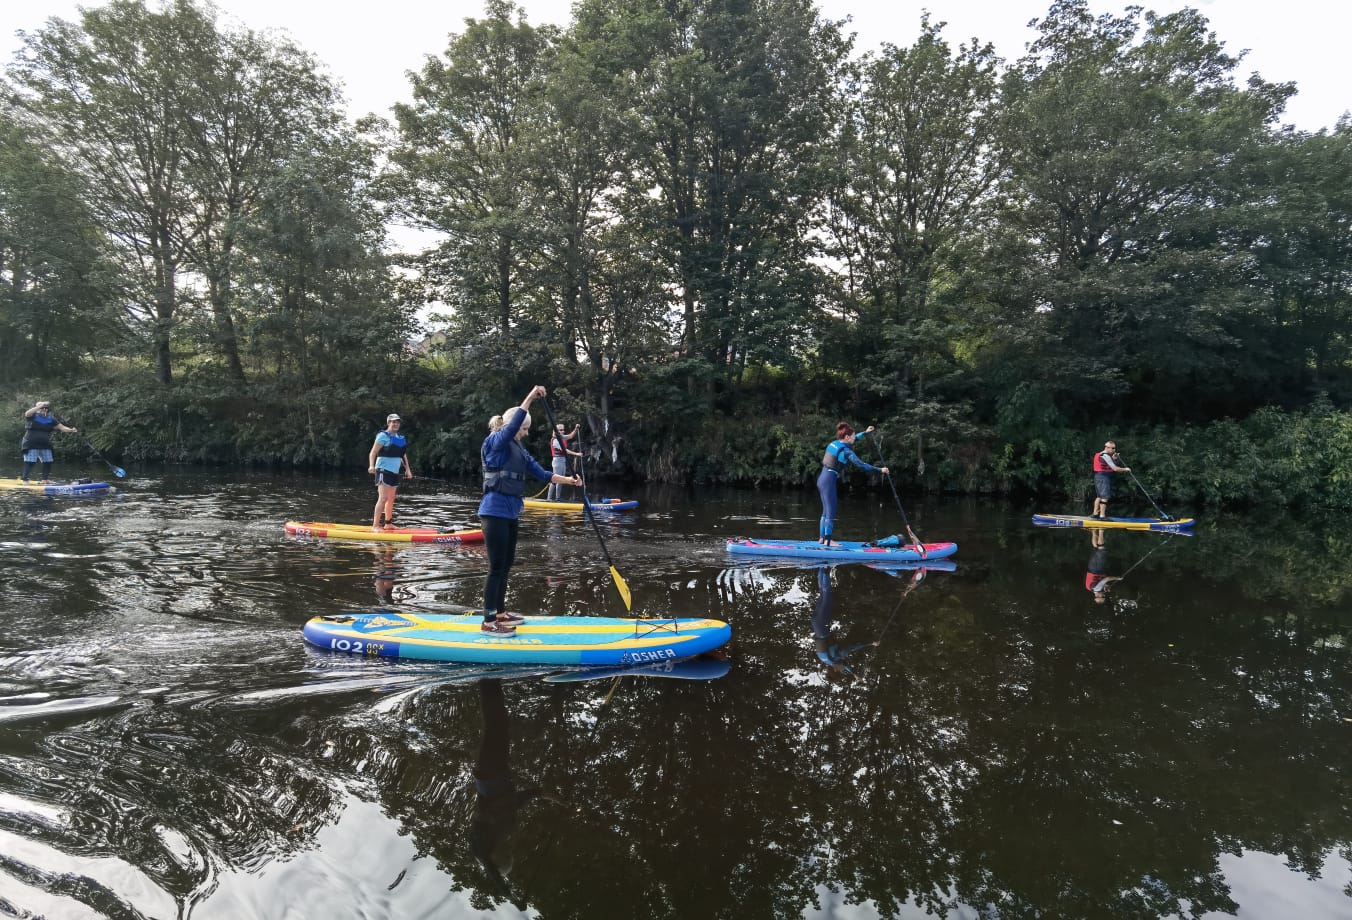 Juice Sup club team out paddleboarding during yorkshires stand up paddle boarding club3